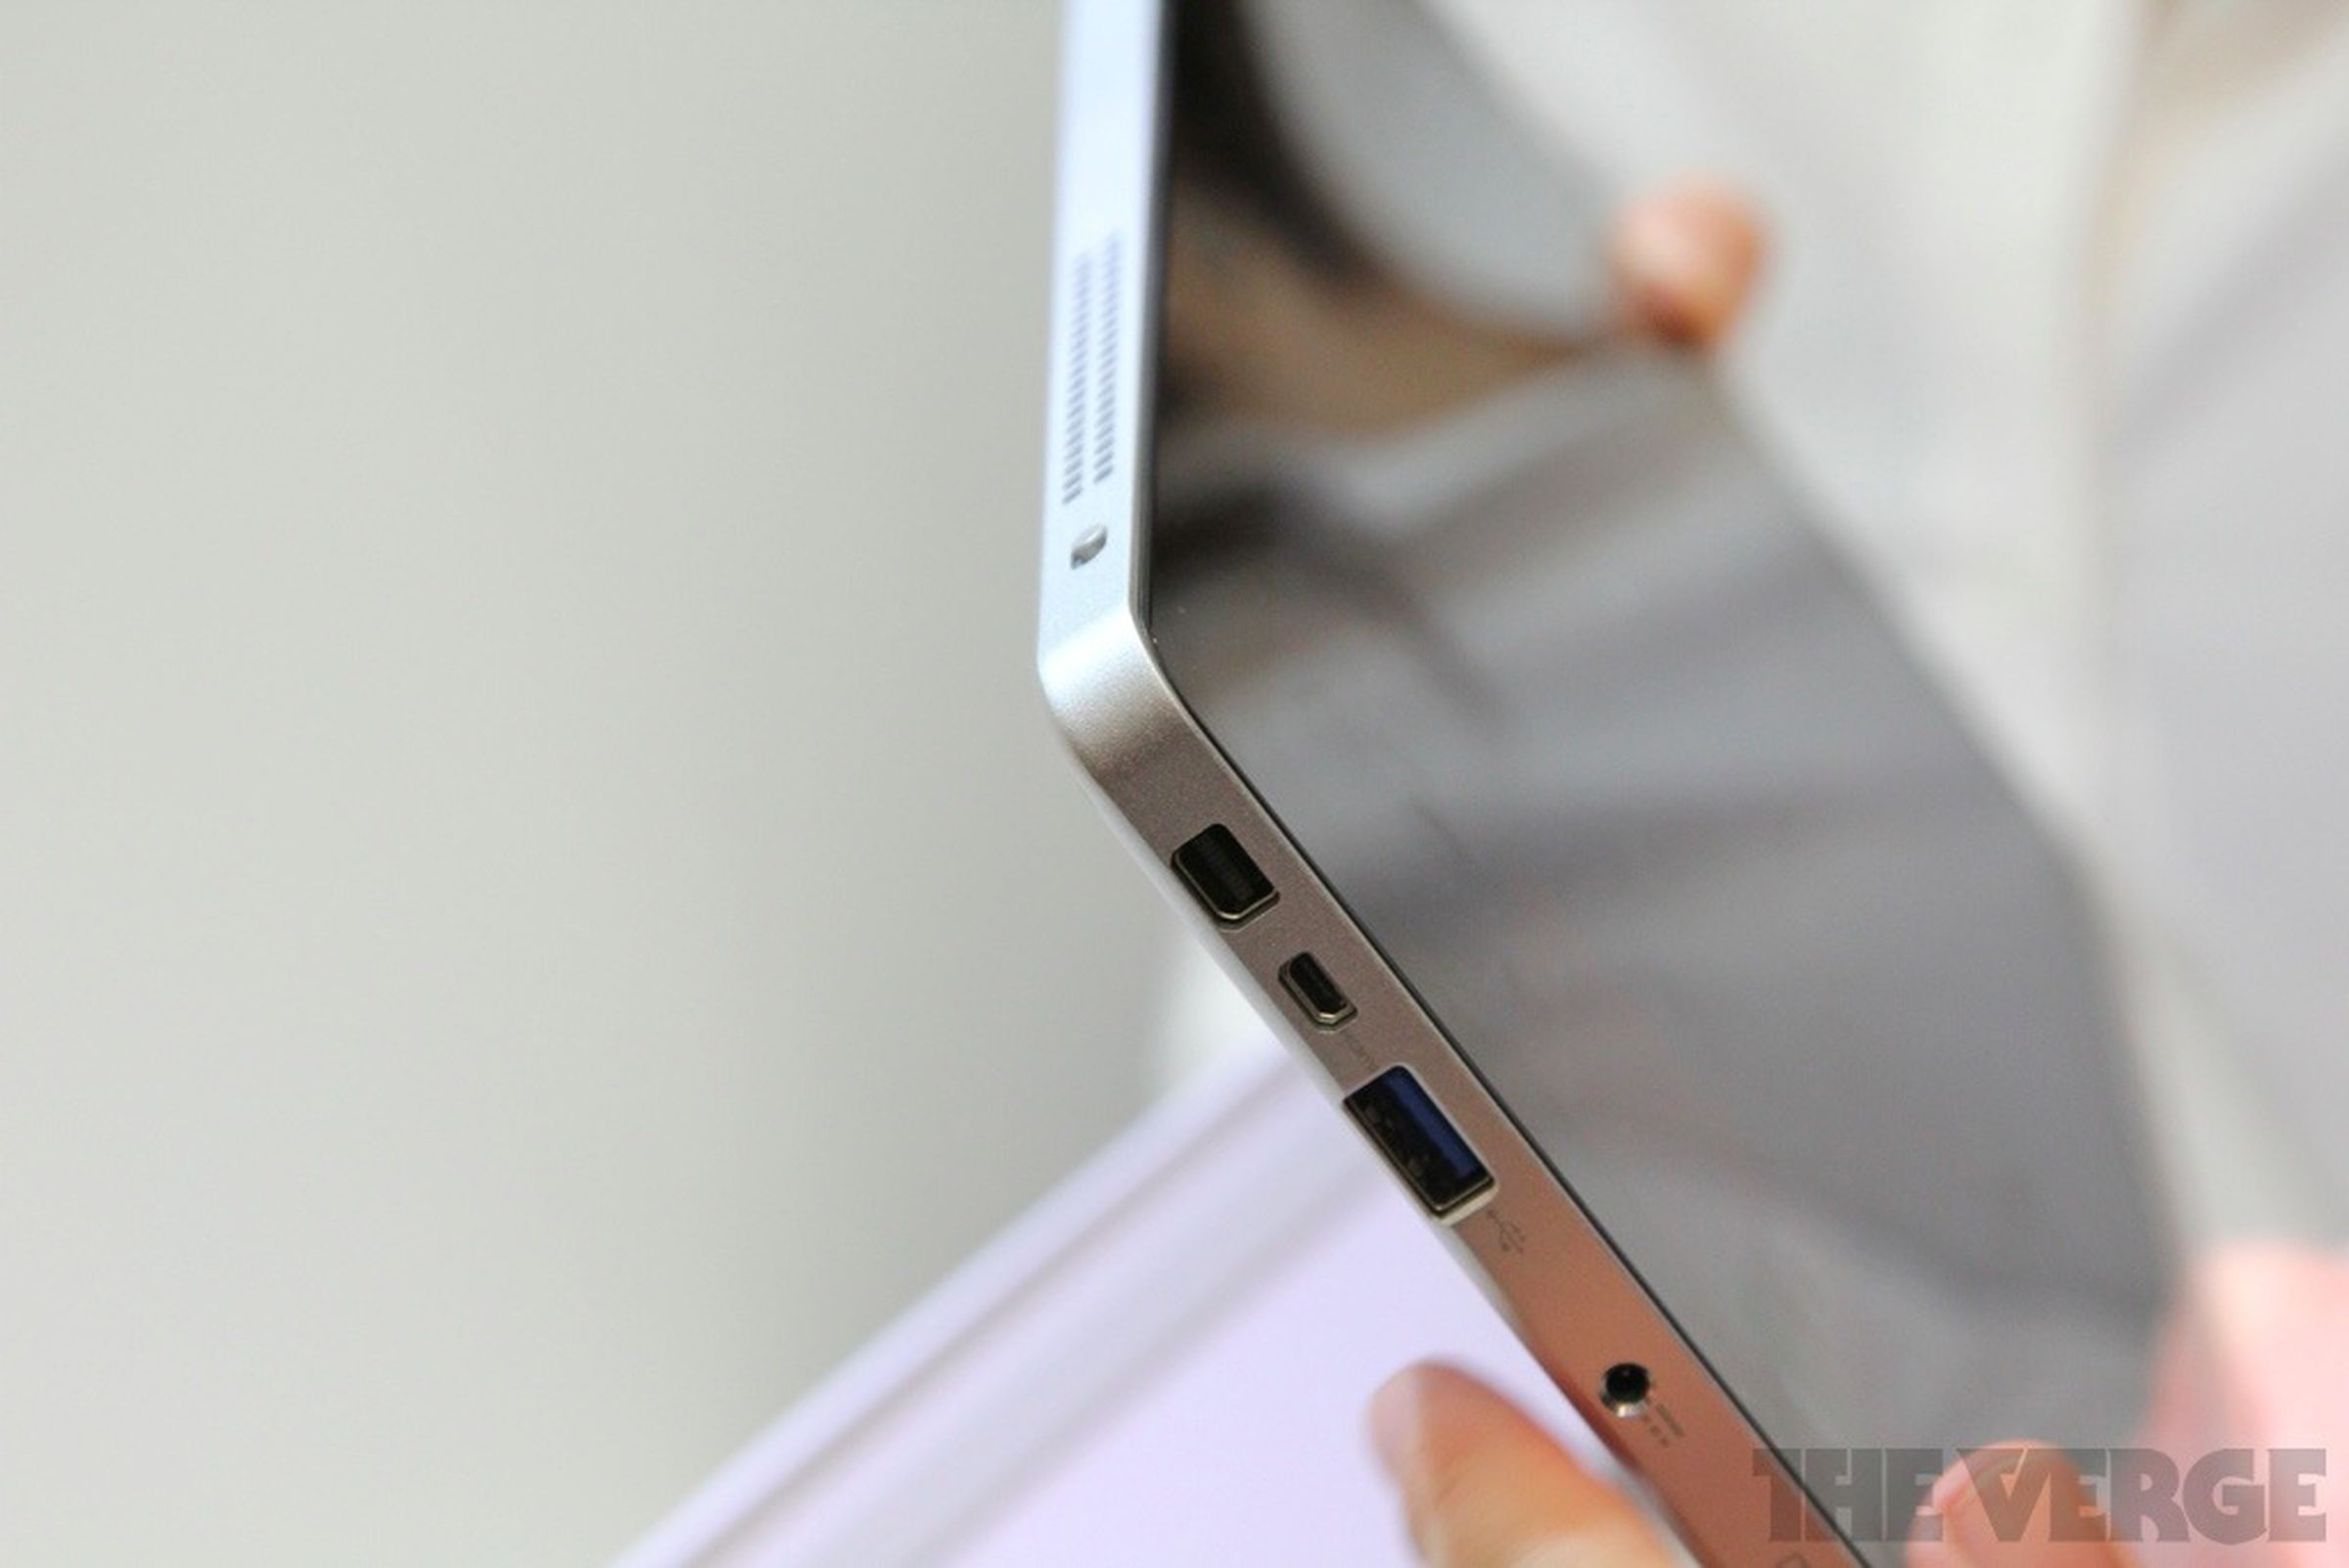 Acer Iconia W700 hands-on pictures